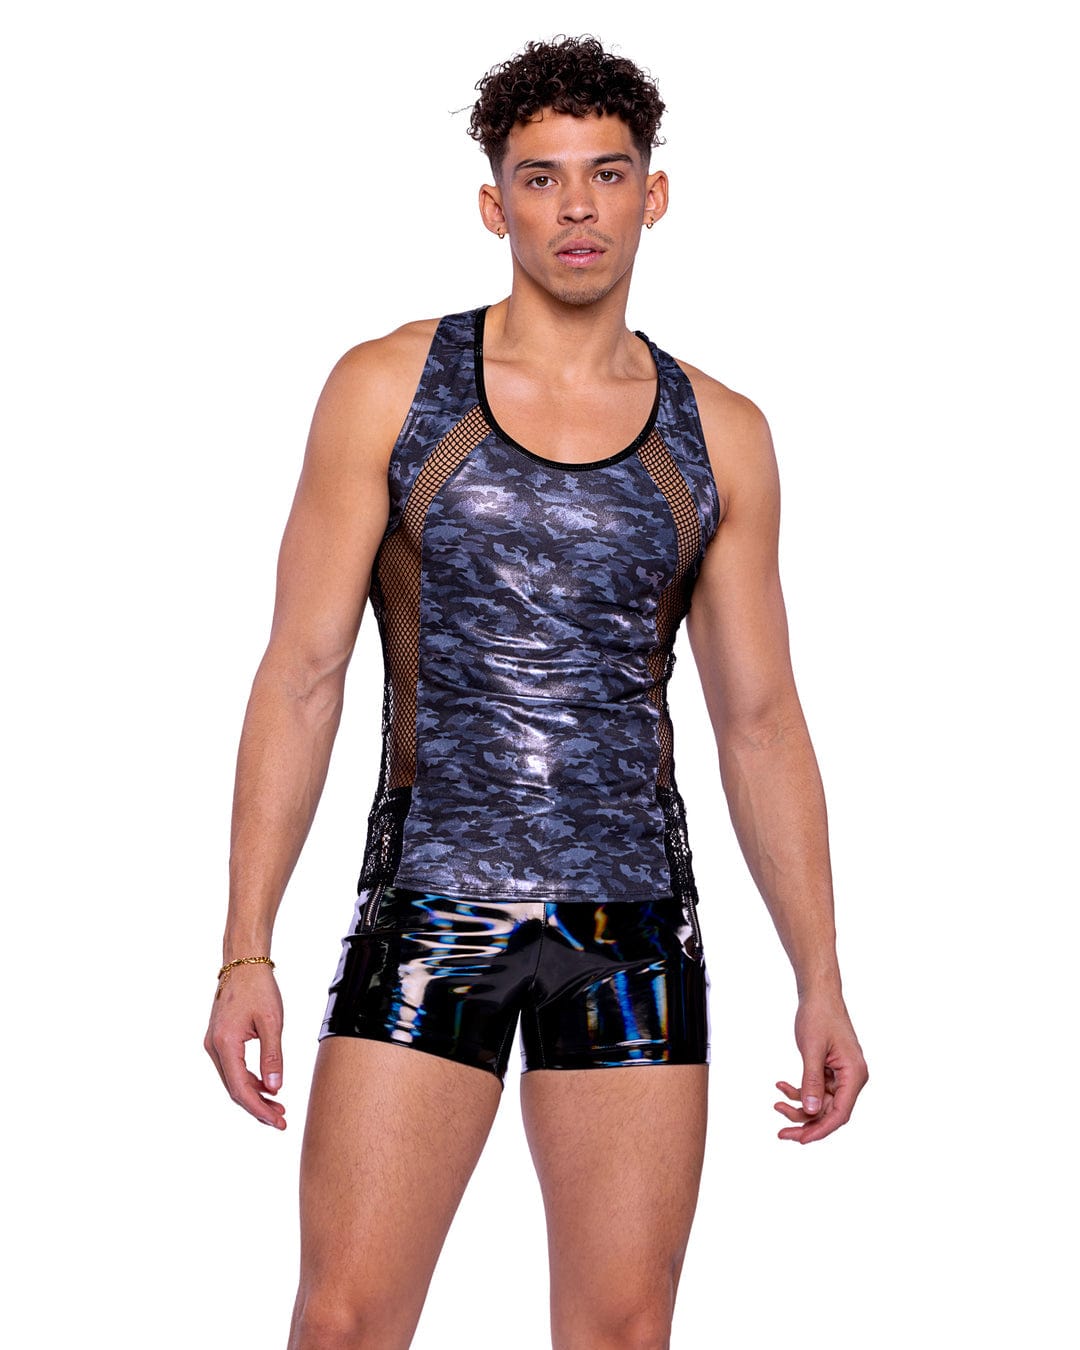 Roma Black/Grey / S Sexy Men's Shimmer Camouflauge Tank Top 6520-Blk/Grey-S 2024 Sexy Men's Shimmer Camouflauge Chaps Rave Wear Apparel & Accessories > Costumes & Accessories > Costumes